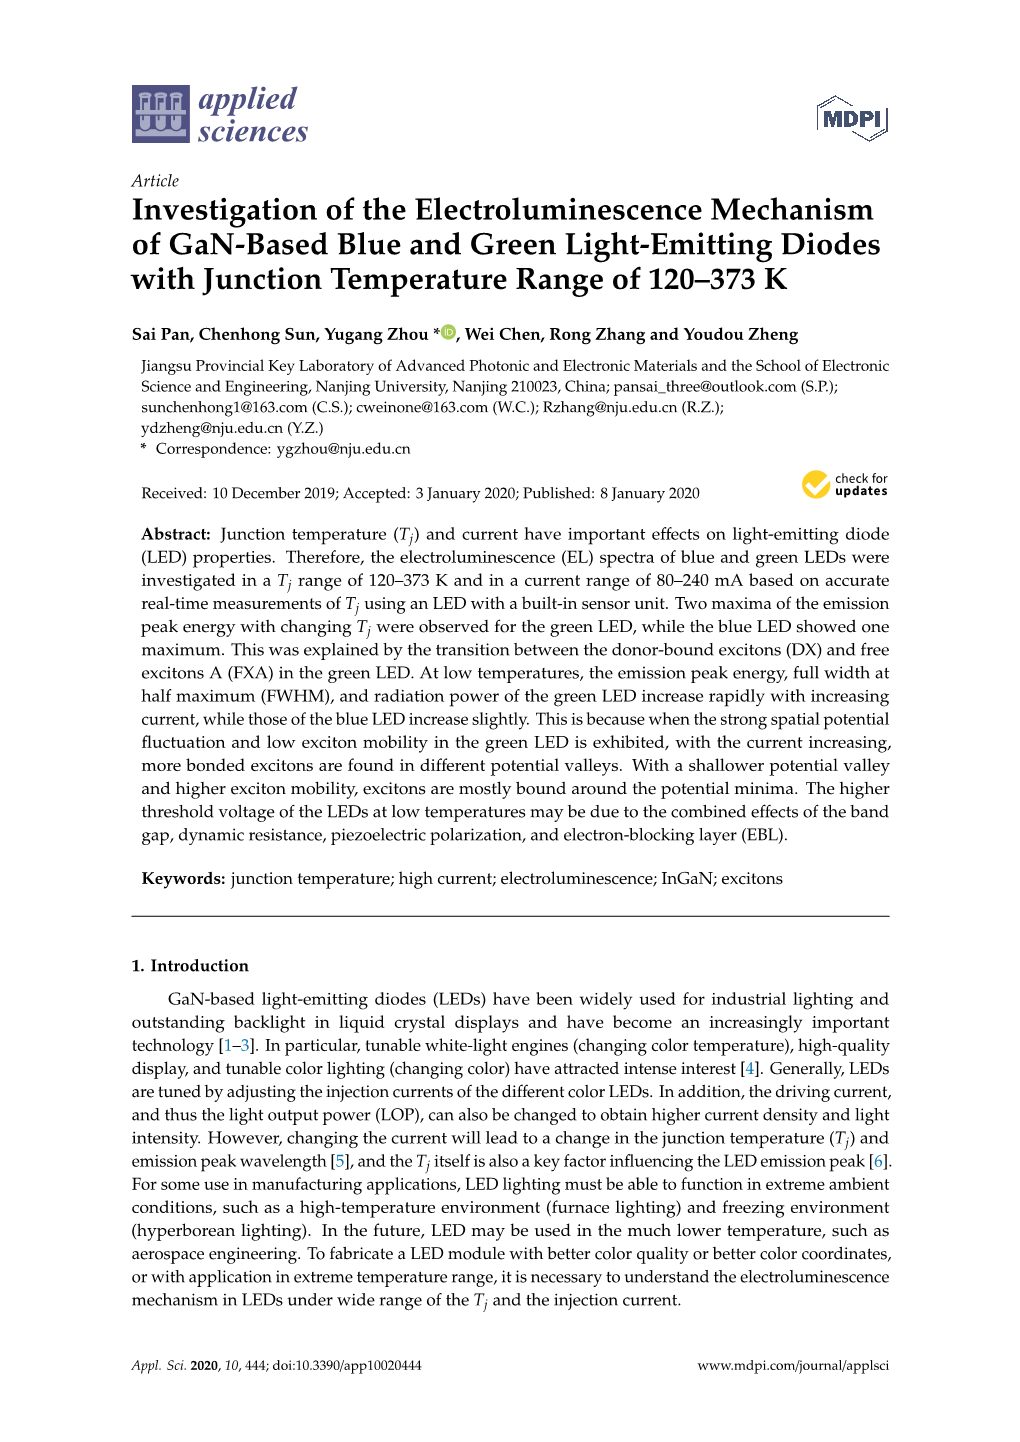 Investigation of the Electroluminescence Mechanism of Gan-Based Blue and Green Light-Emitting Diodes with Junction Temperature Range of 120–373 K